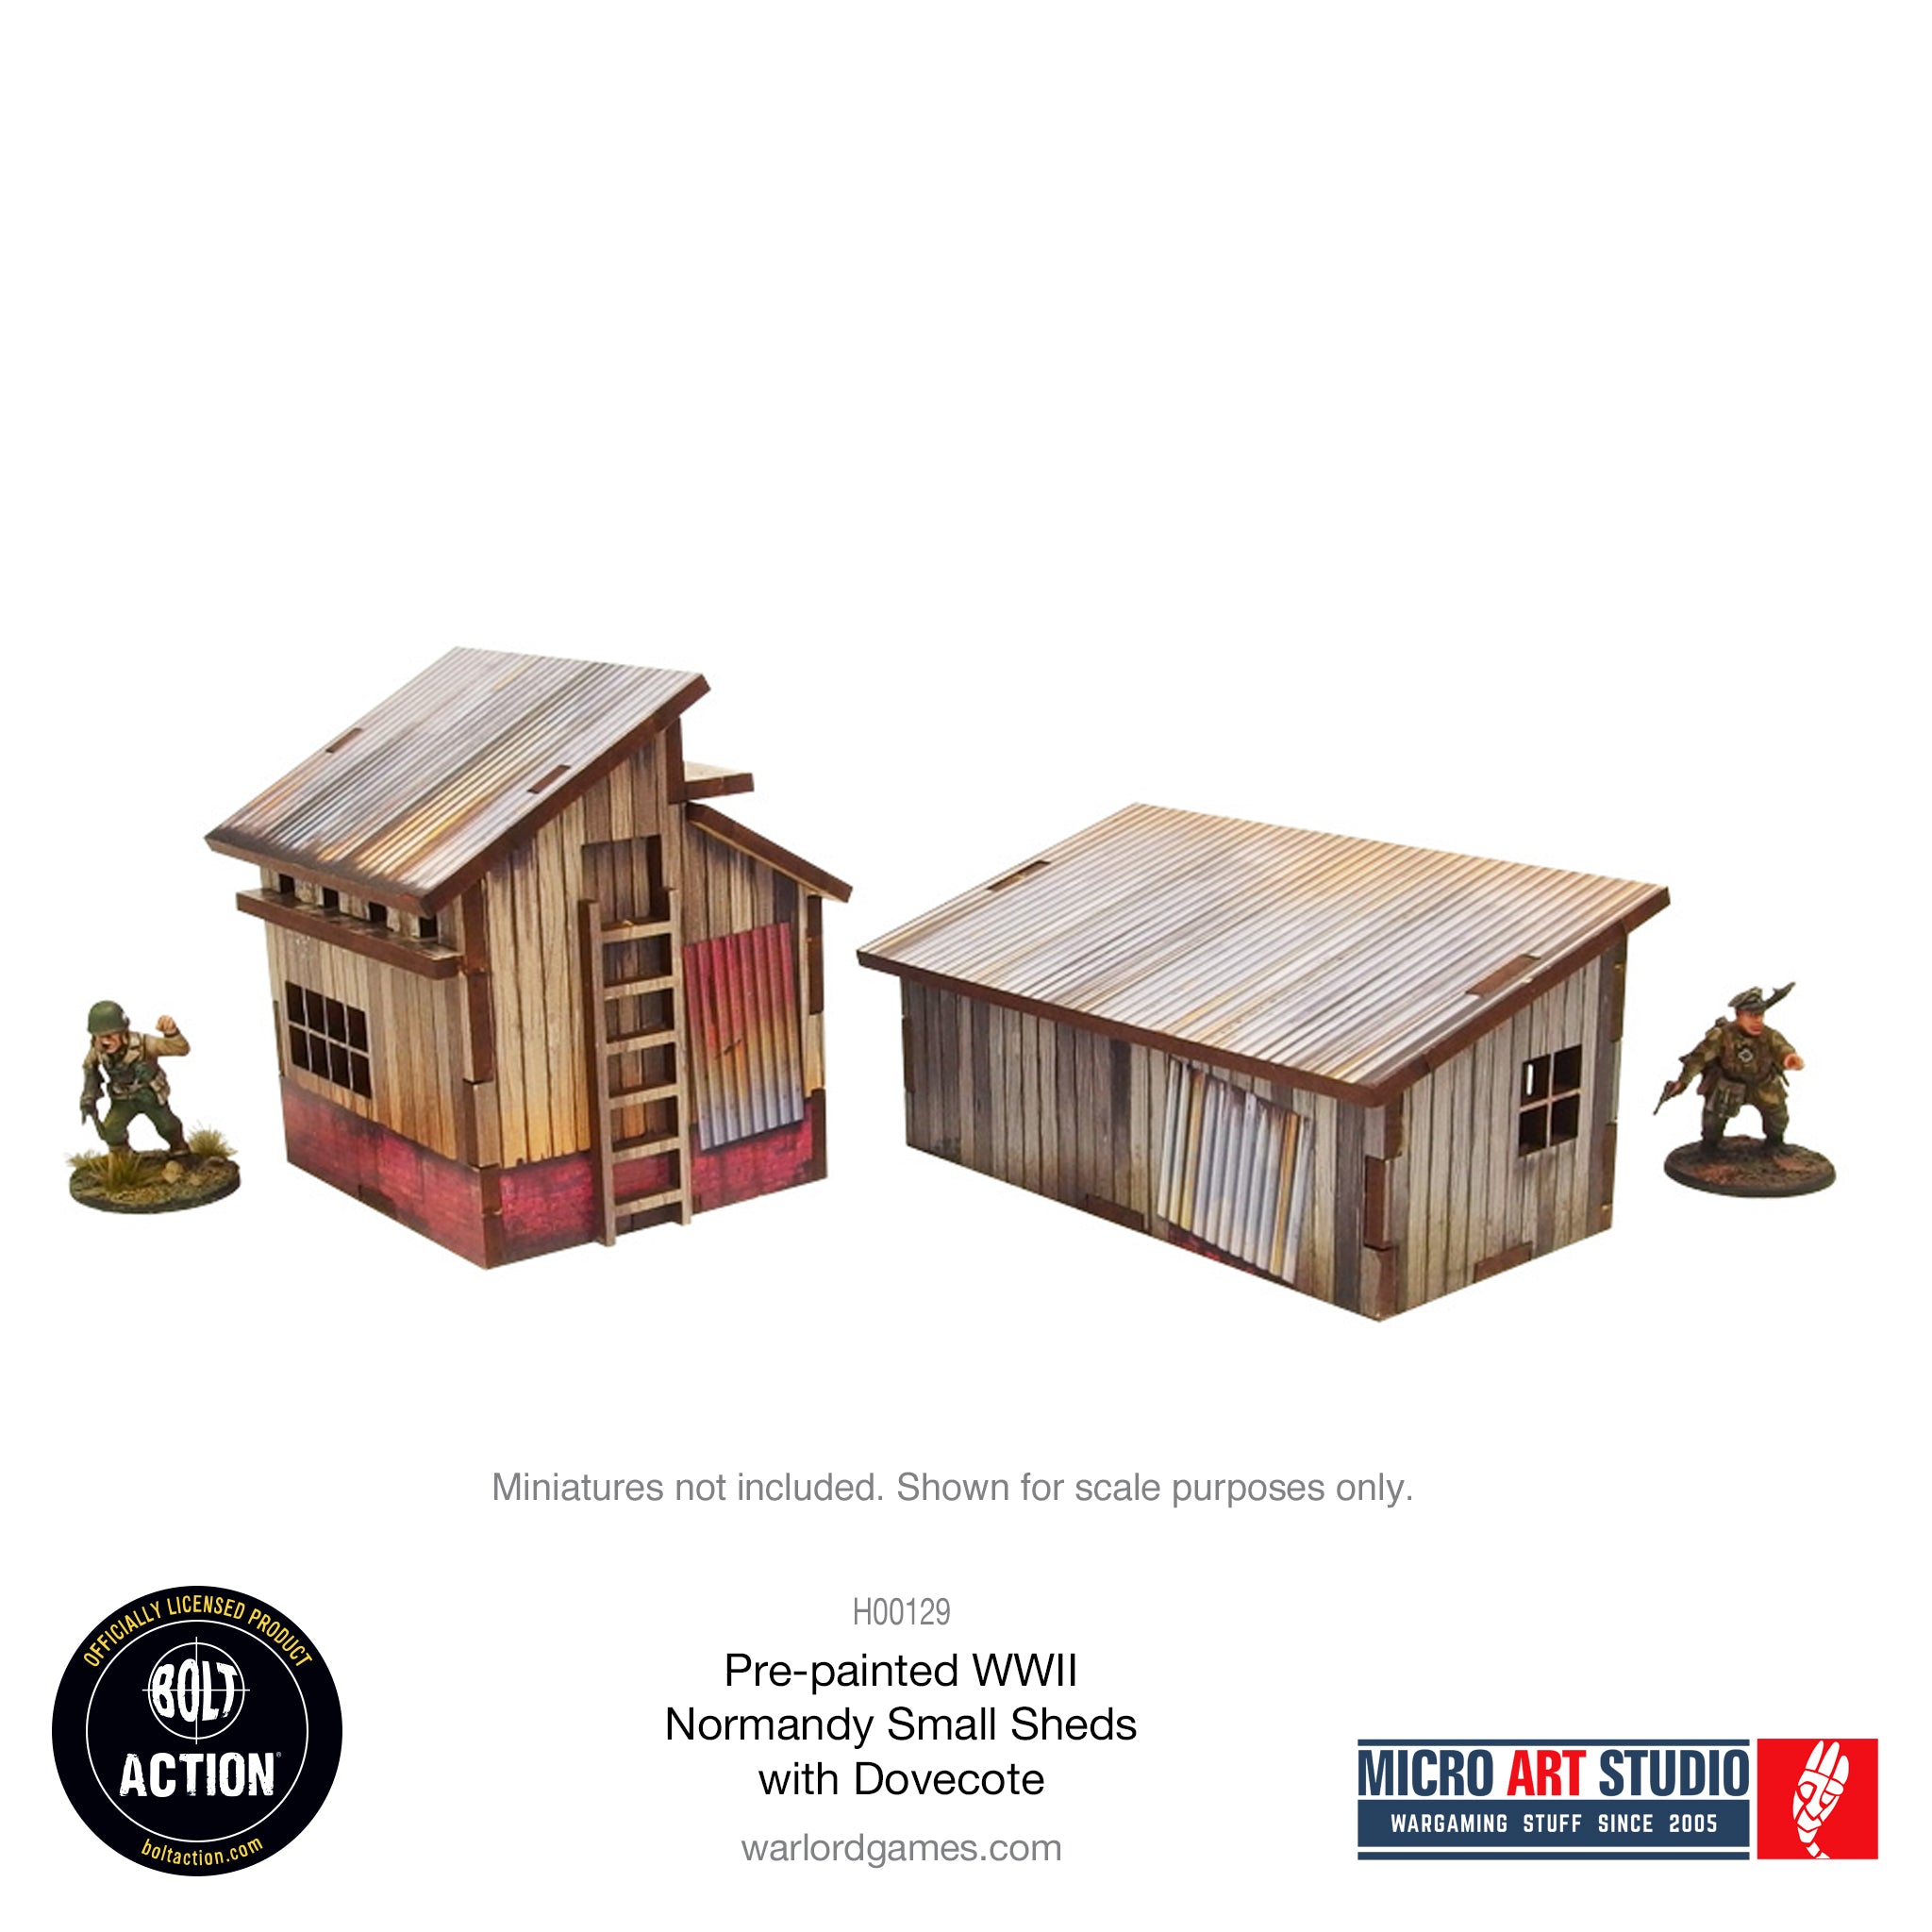 Pre-painted WW2 Normandy Small Sheds with Dovecote